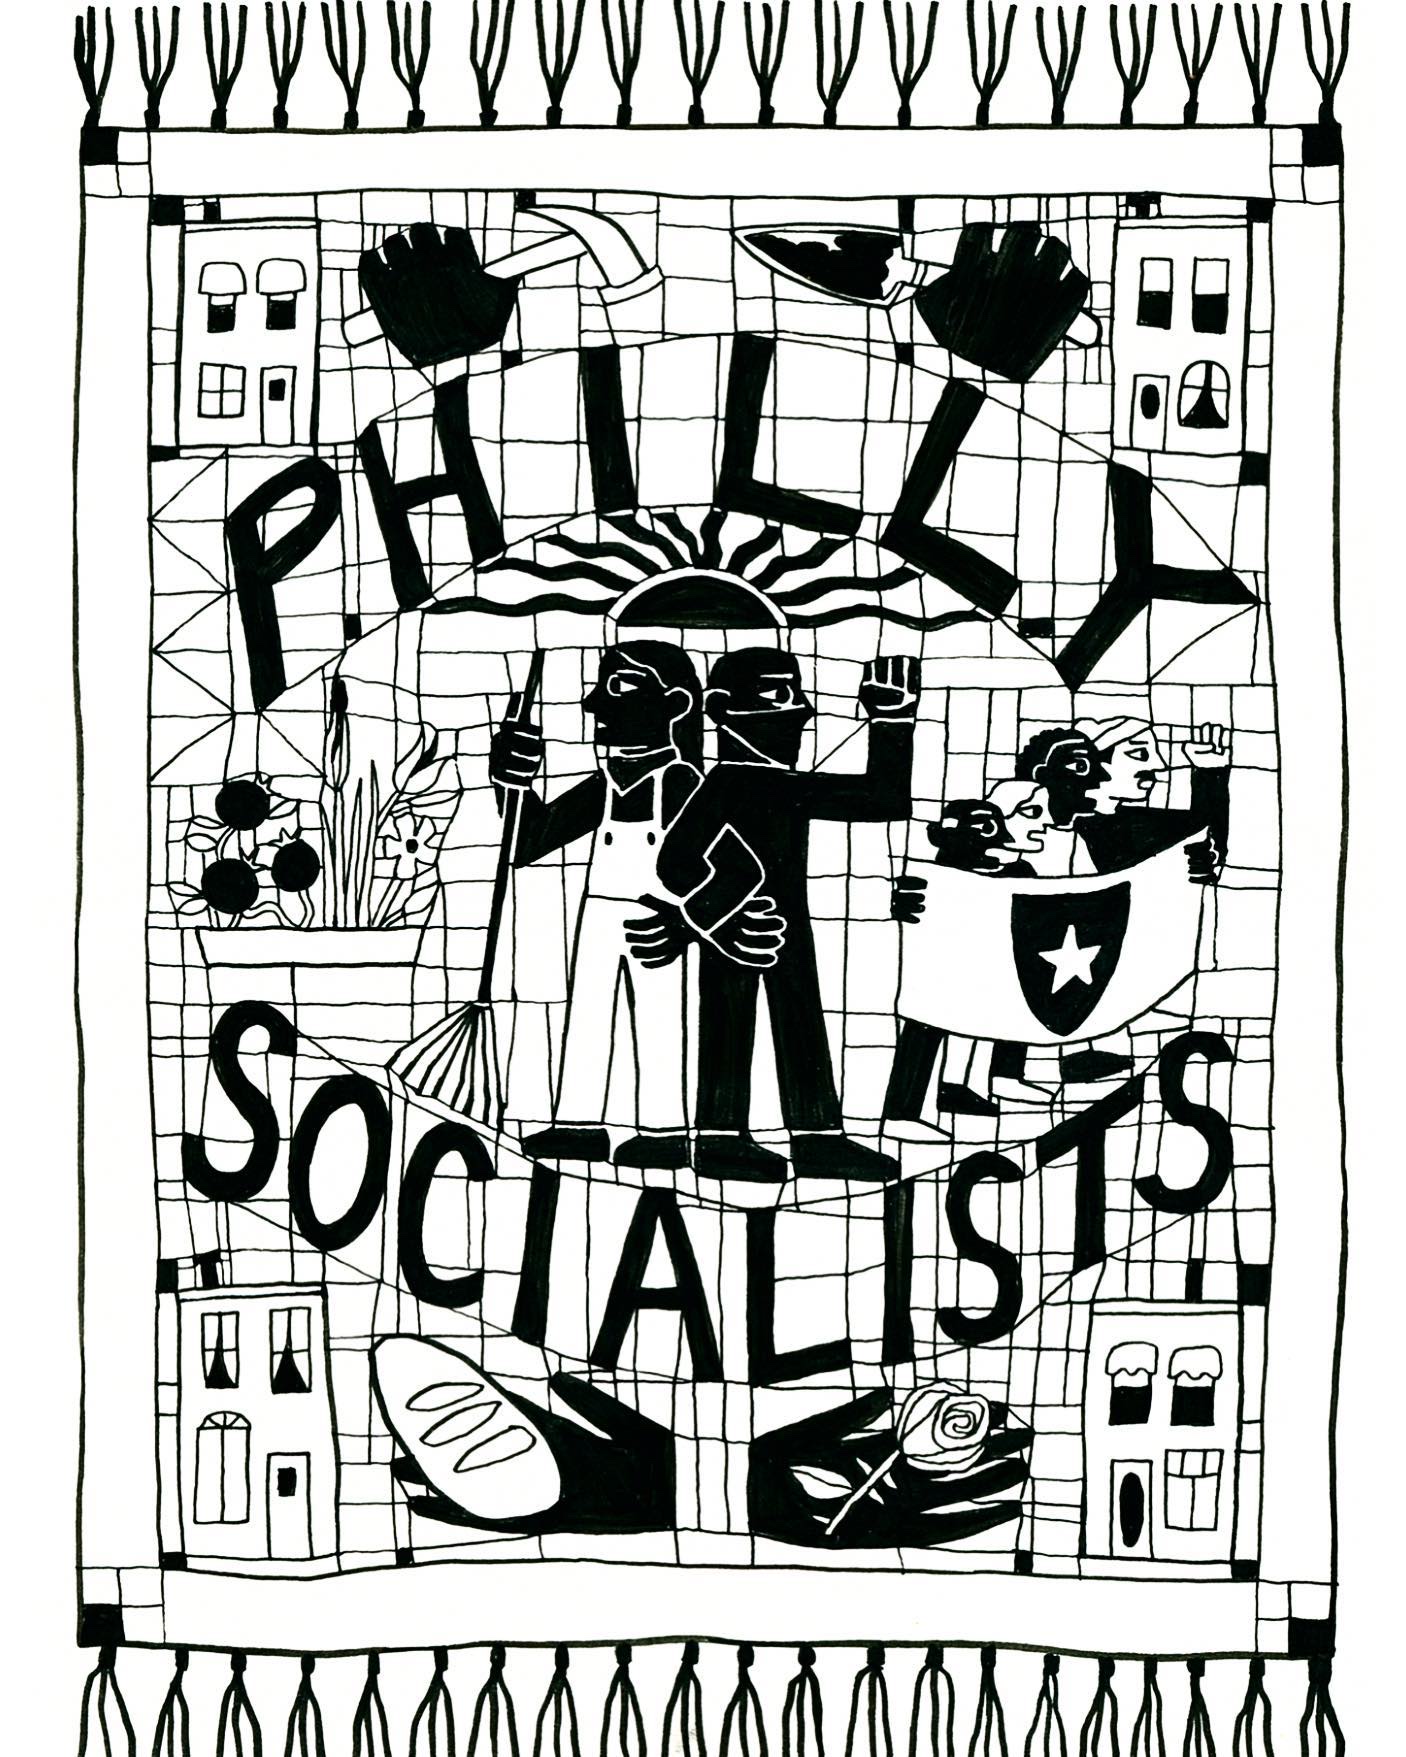 A black-on-white drawing by Tabitha Arnold with the words "Philly Socialists" around two people with linked arms, one wearing a mask and other holding a rake. There are other images scattered around, including 4 people holding a banner at a protest, rowhomes, hands holding a hammer, spade, bread, and a rose, and blooming flowers.